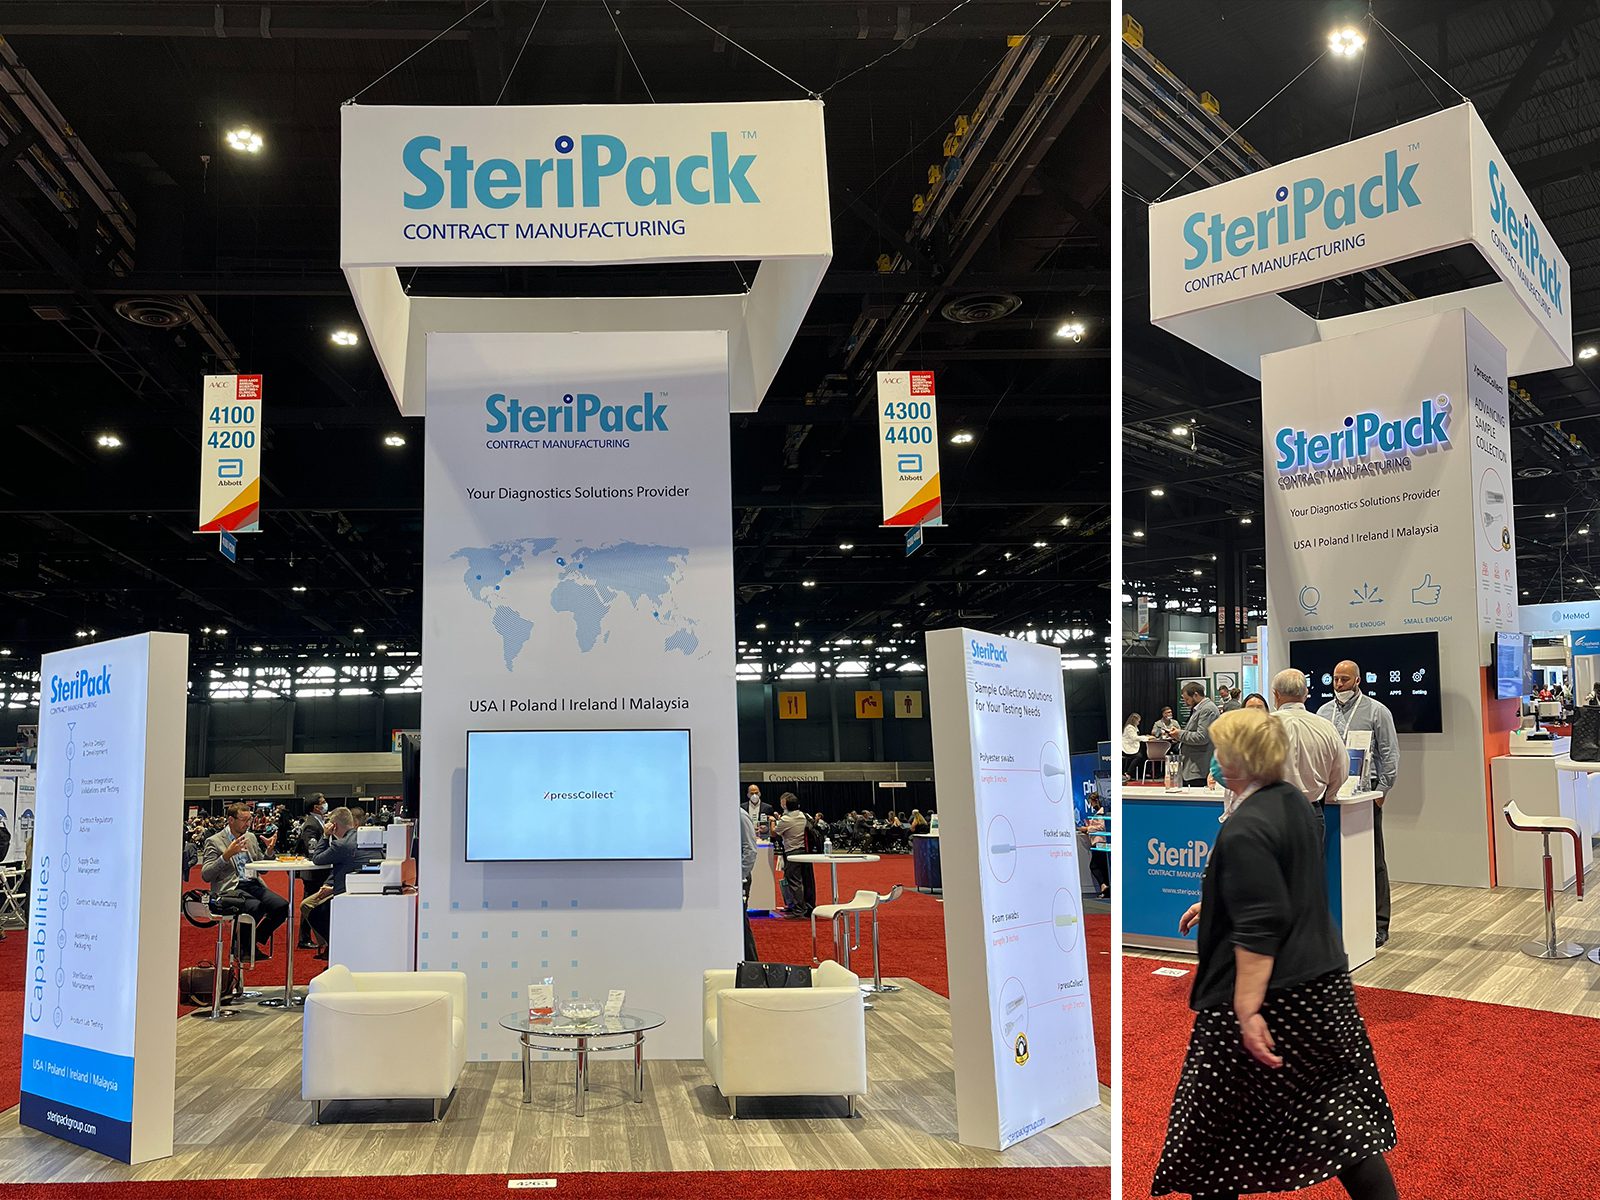 SteriPack's booth